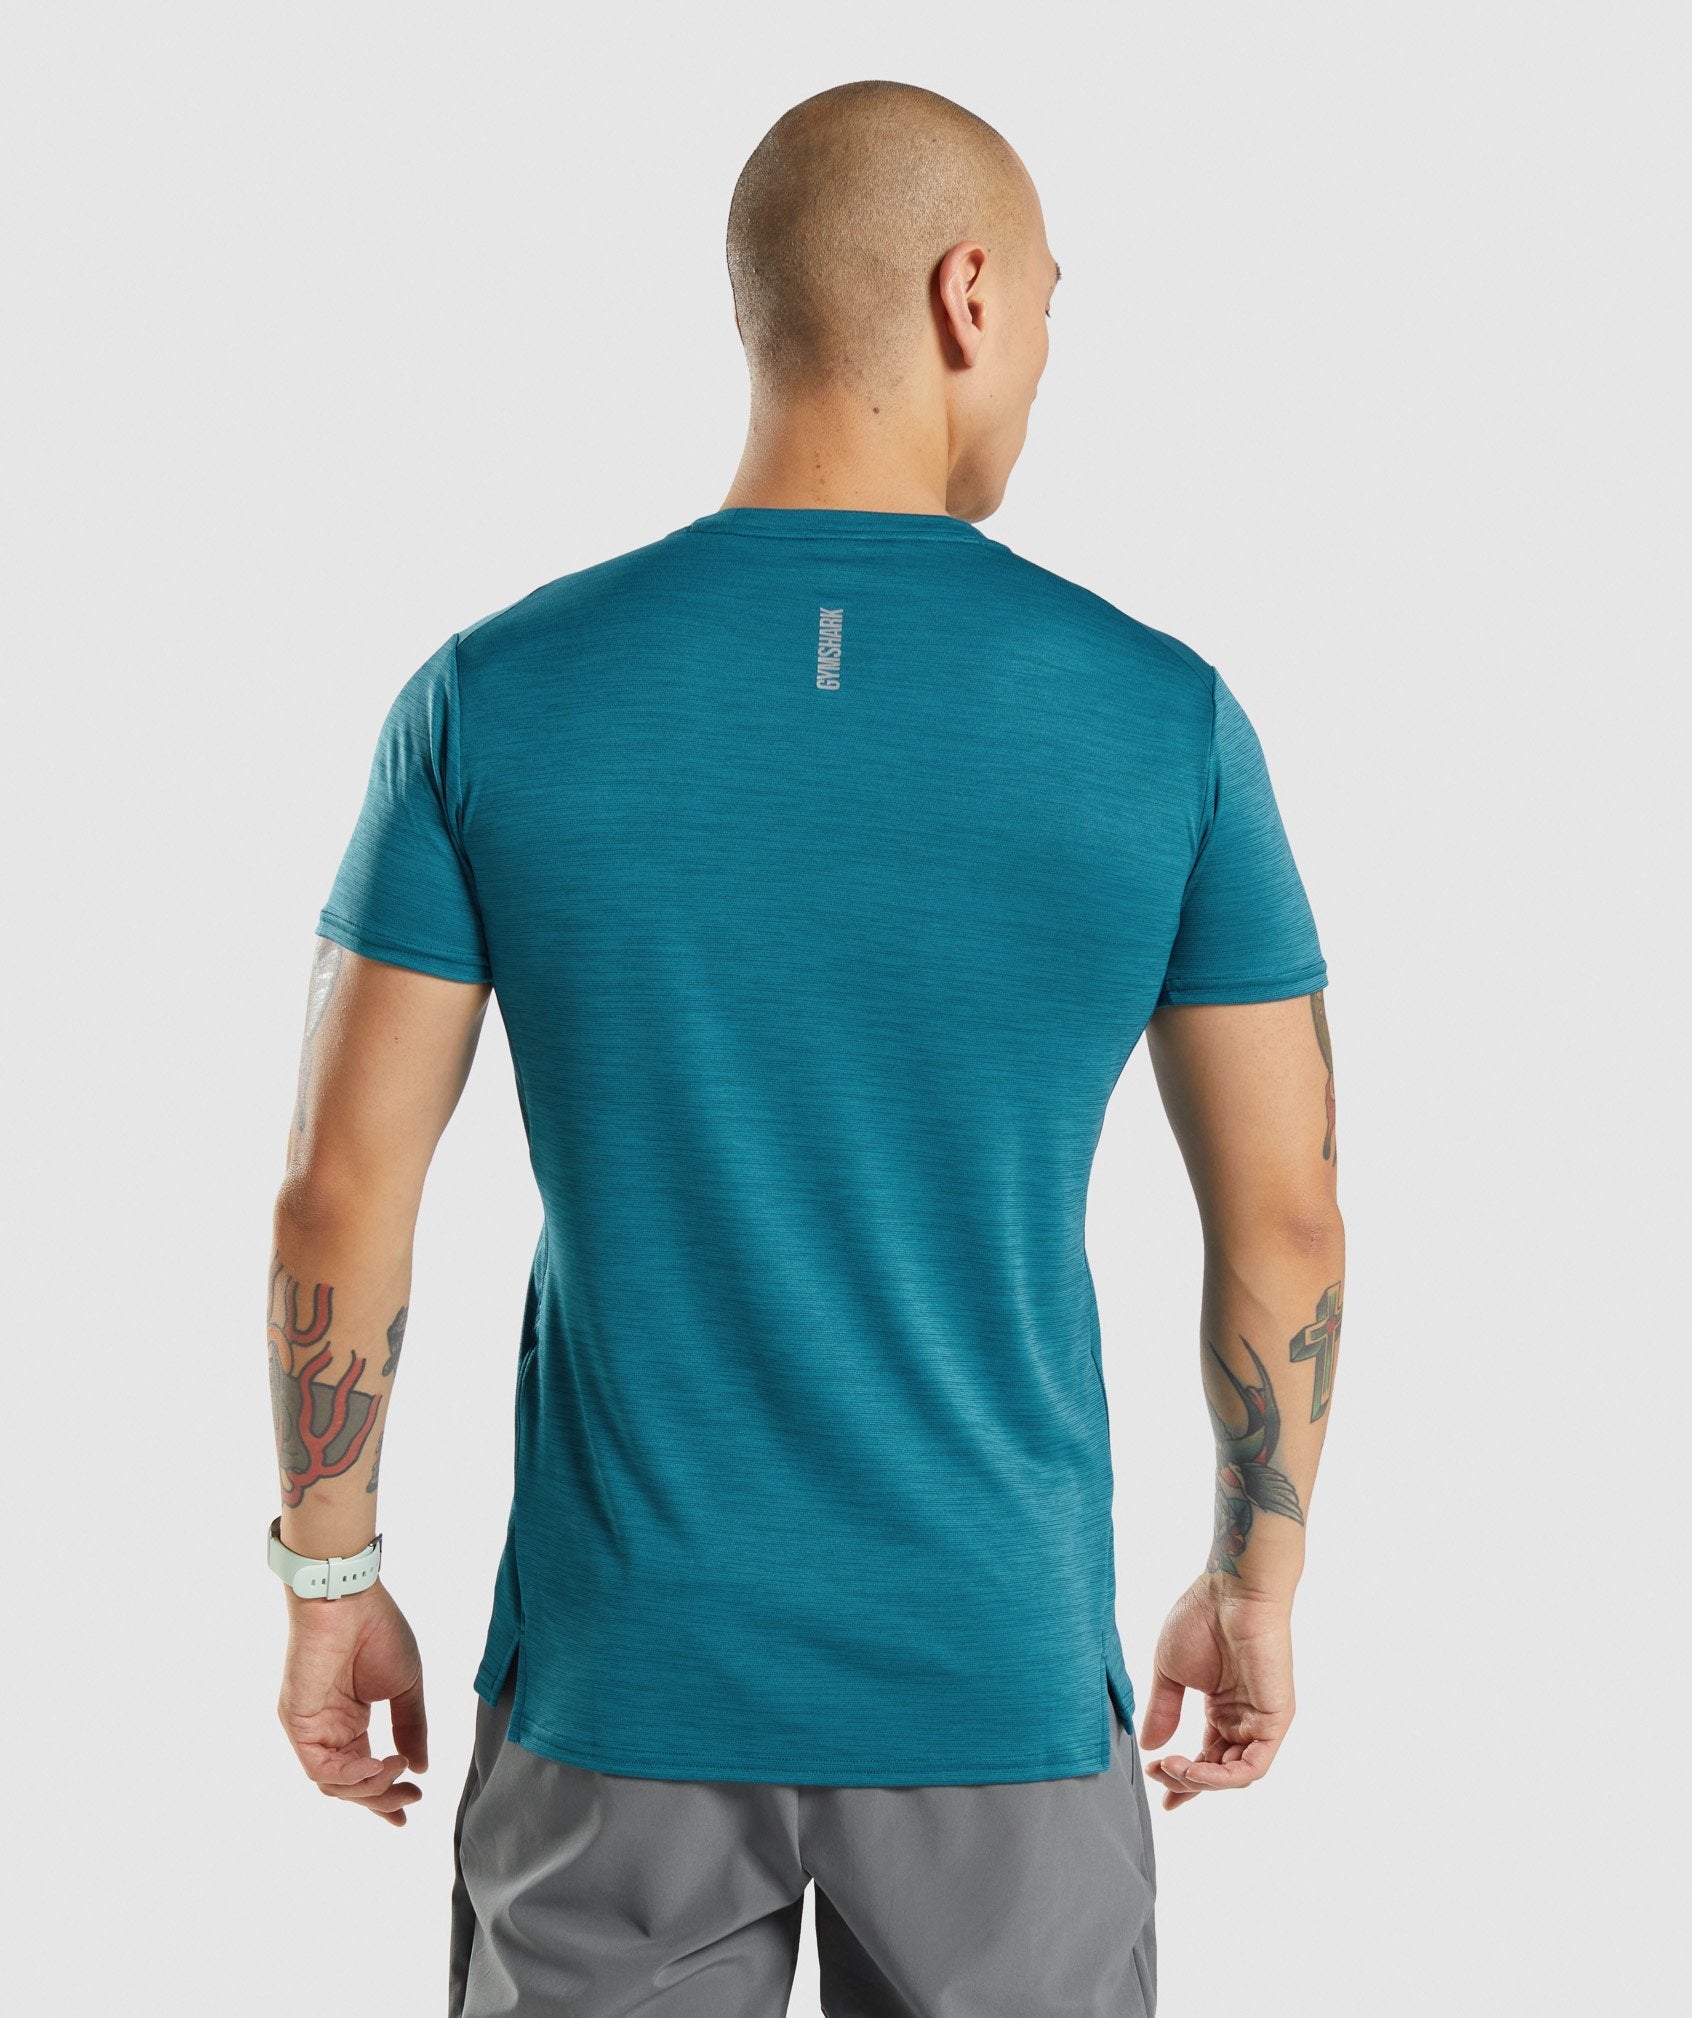 Speed T-Shirt in Teal/Teal Marl